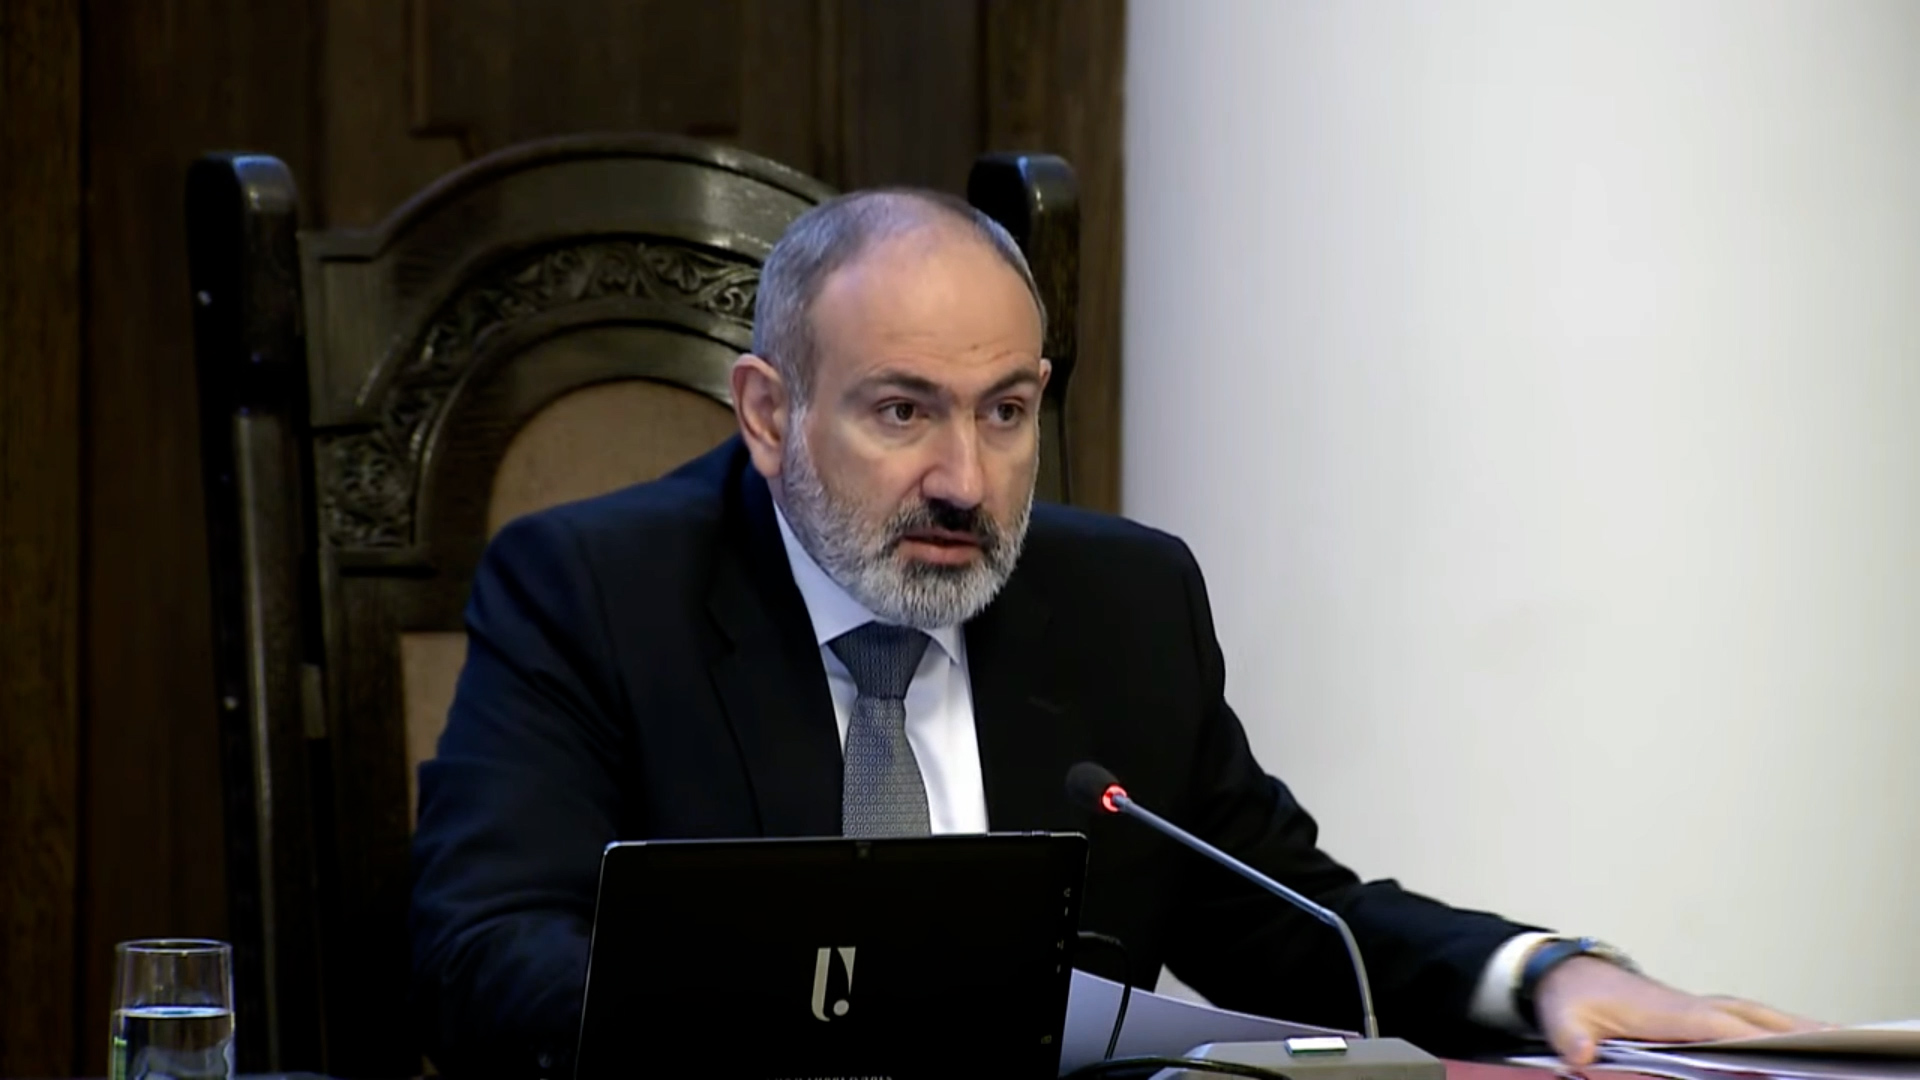 Pashinyan insists there is no draft plan to settle Karabakh conflict, stresses key role of Minsk Group